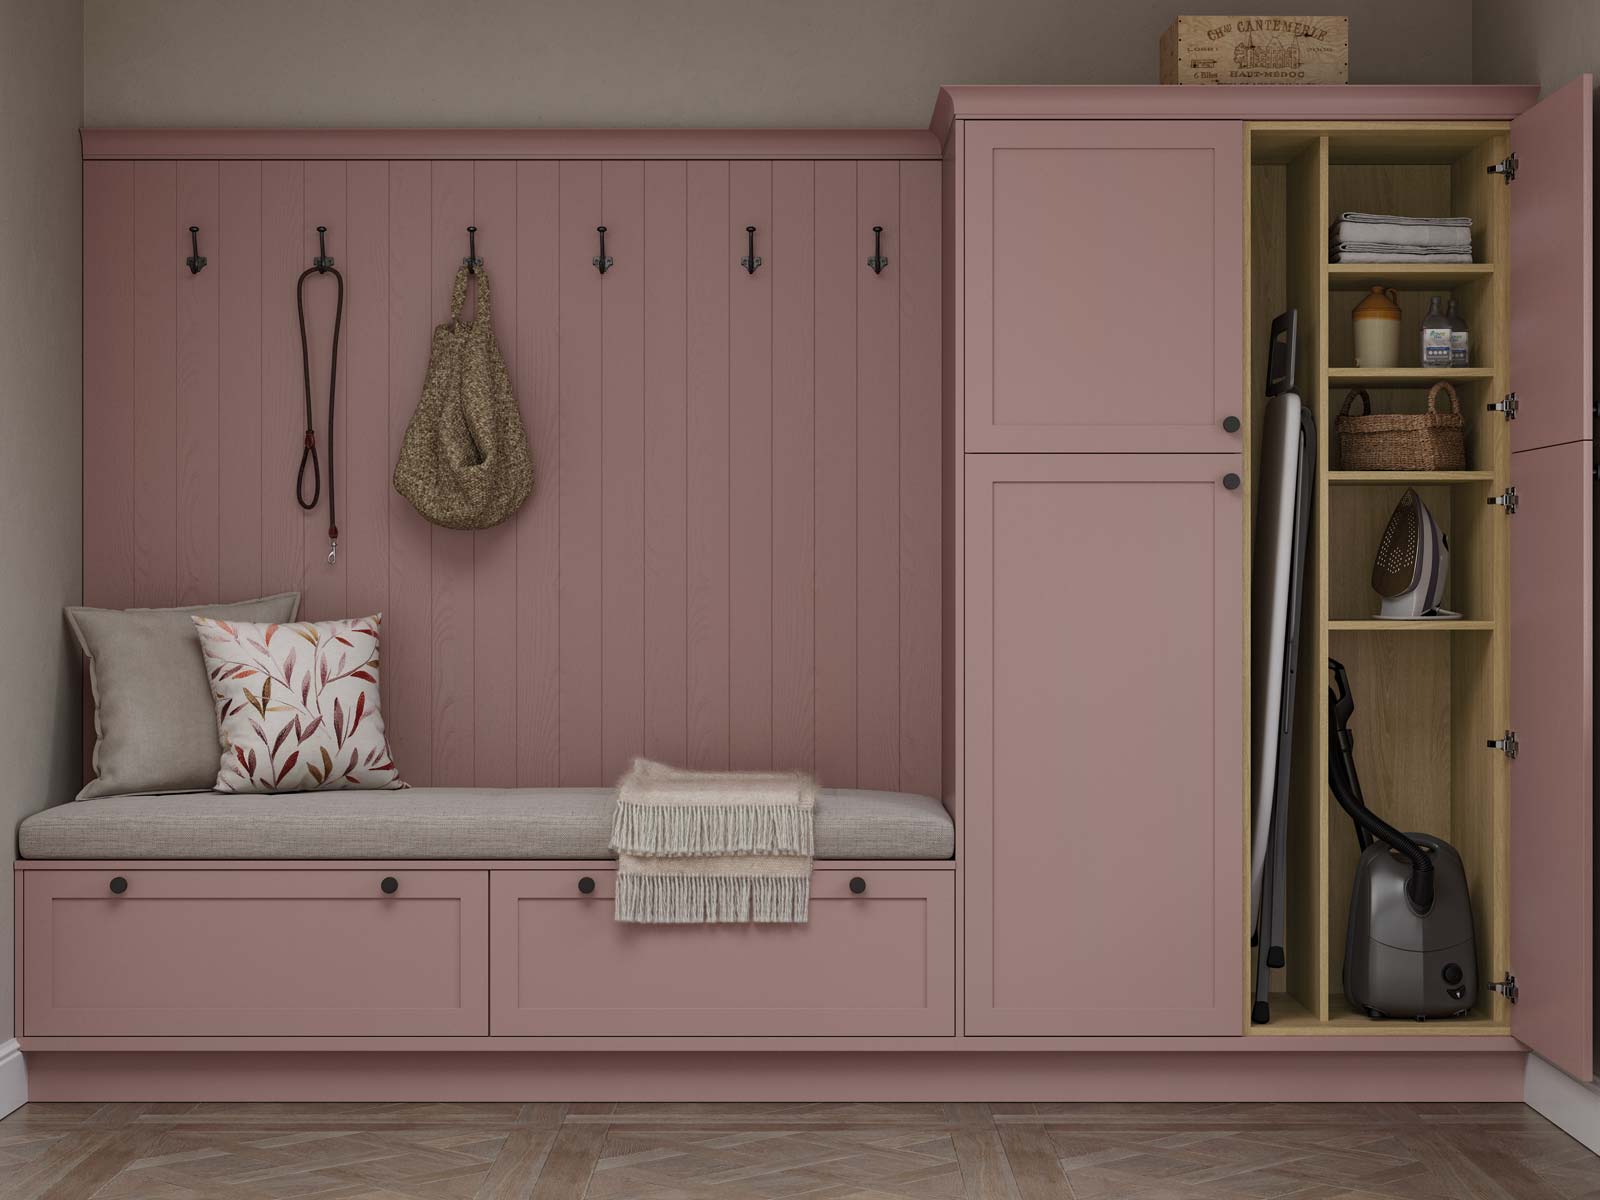 Boot room seat in pink and laundry room cupboard with divider